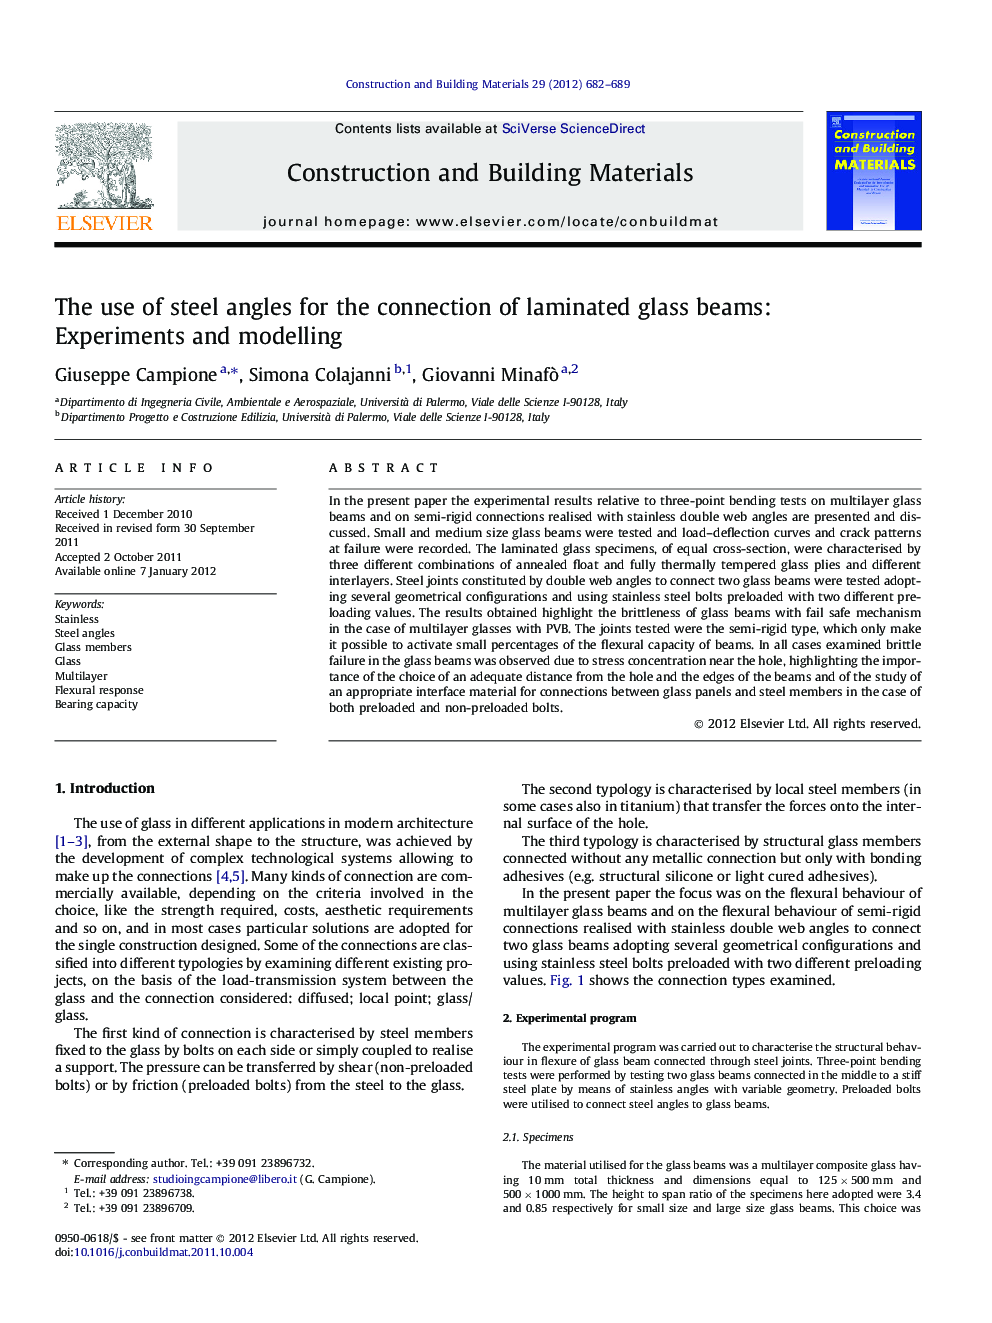 The use of steel angles for the connection of laminated glass beams: Experiments and modelling